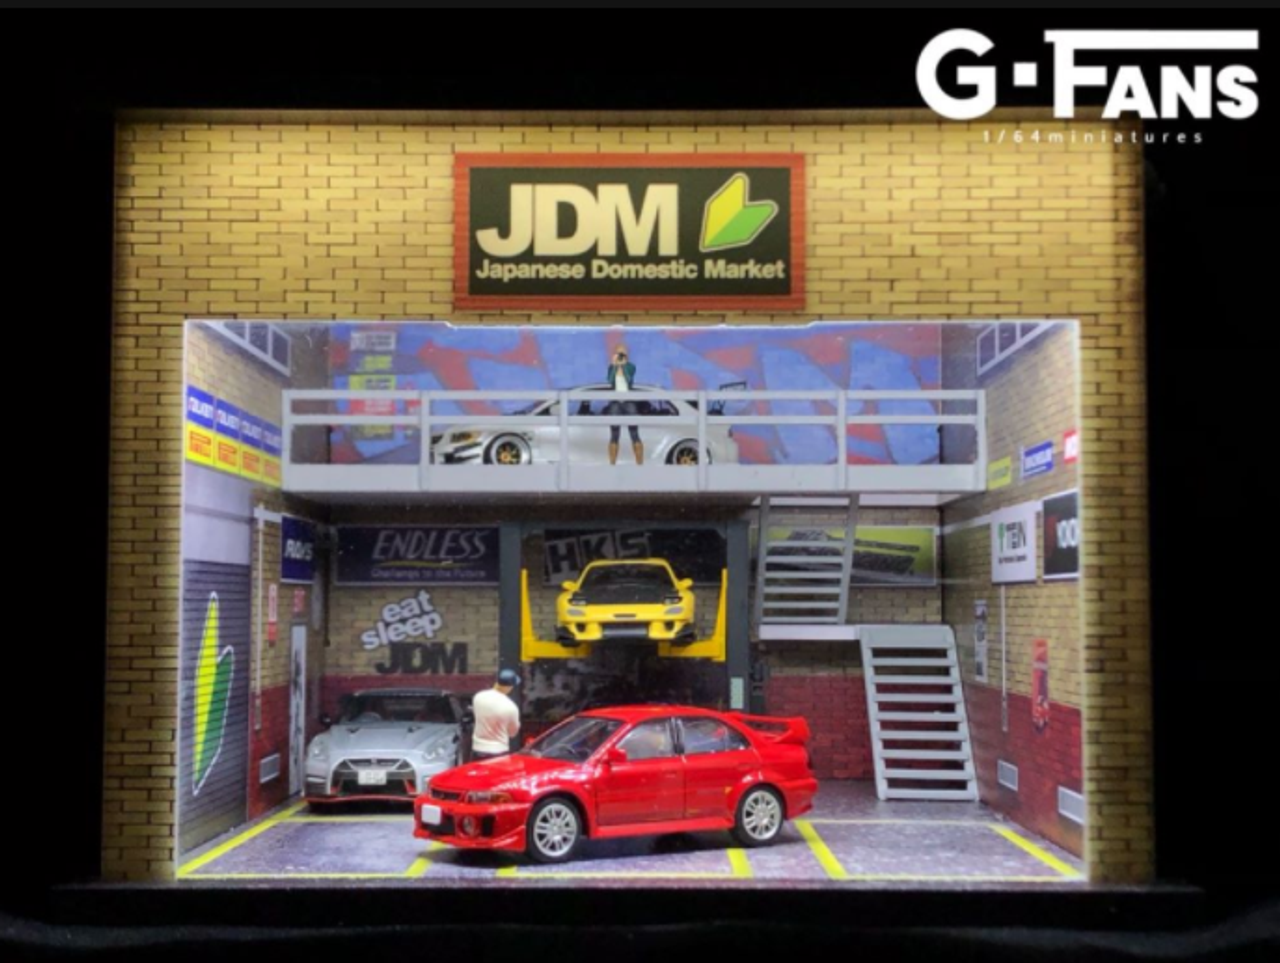  1/64 G-fans JDM Scene Diorama with LED  (Car Models NOT Included)